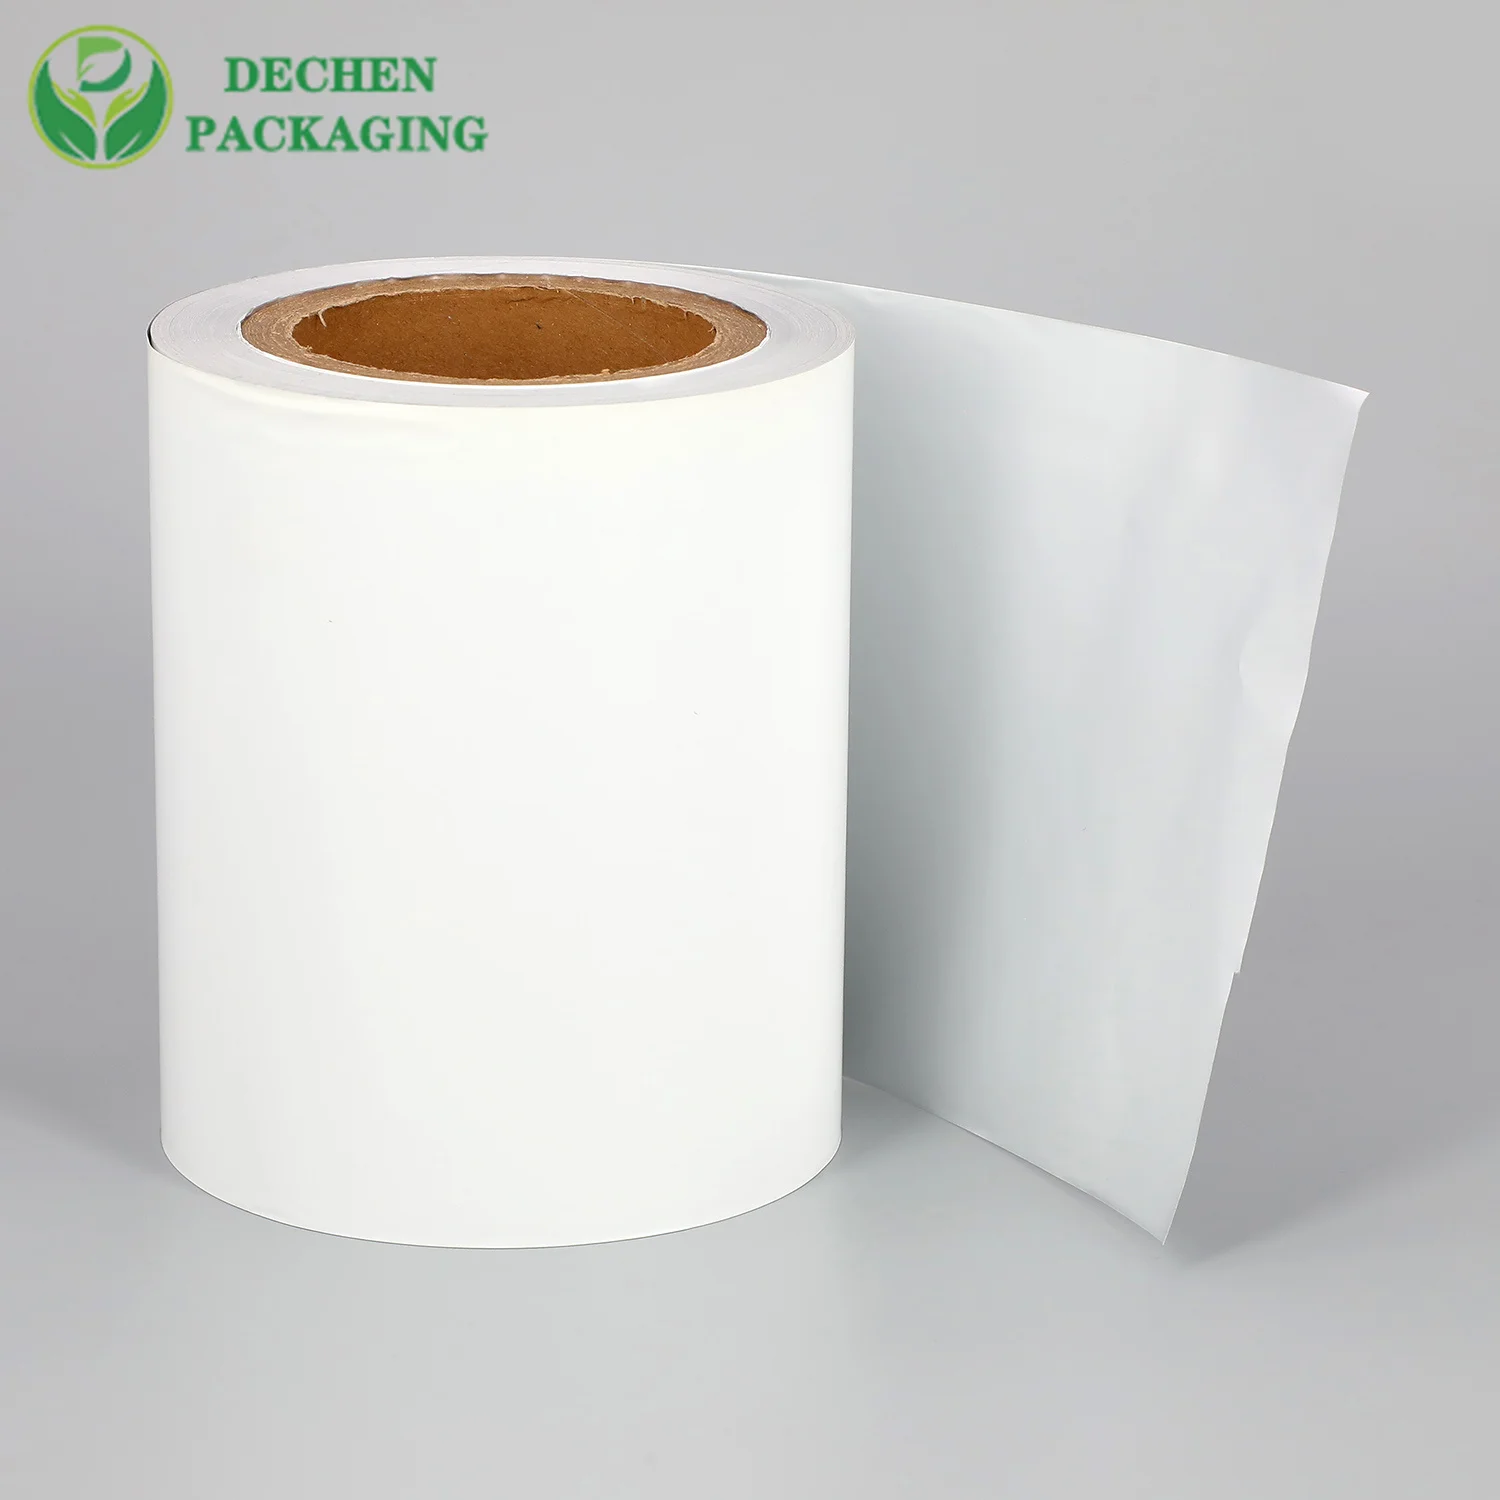 What is laminated foil paper coating?